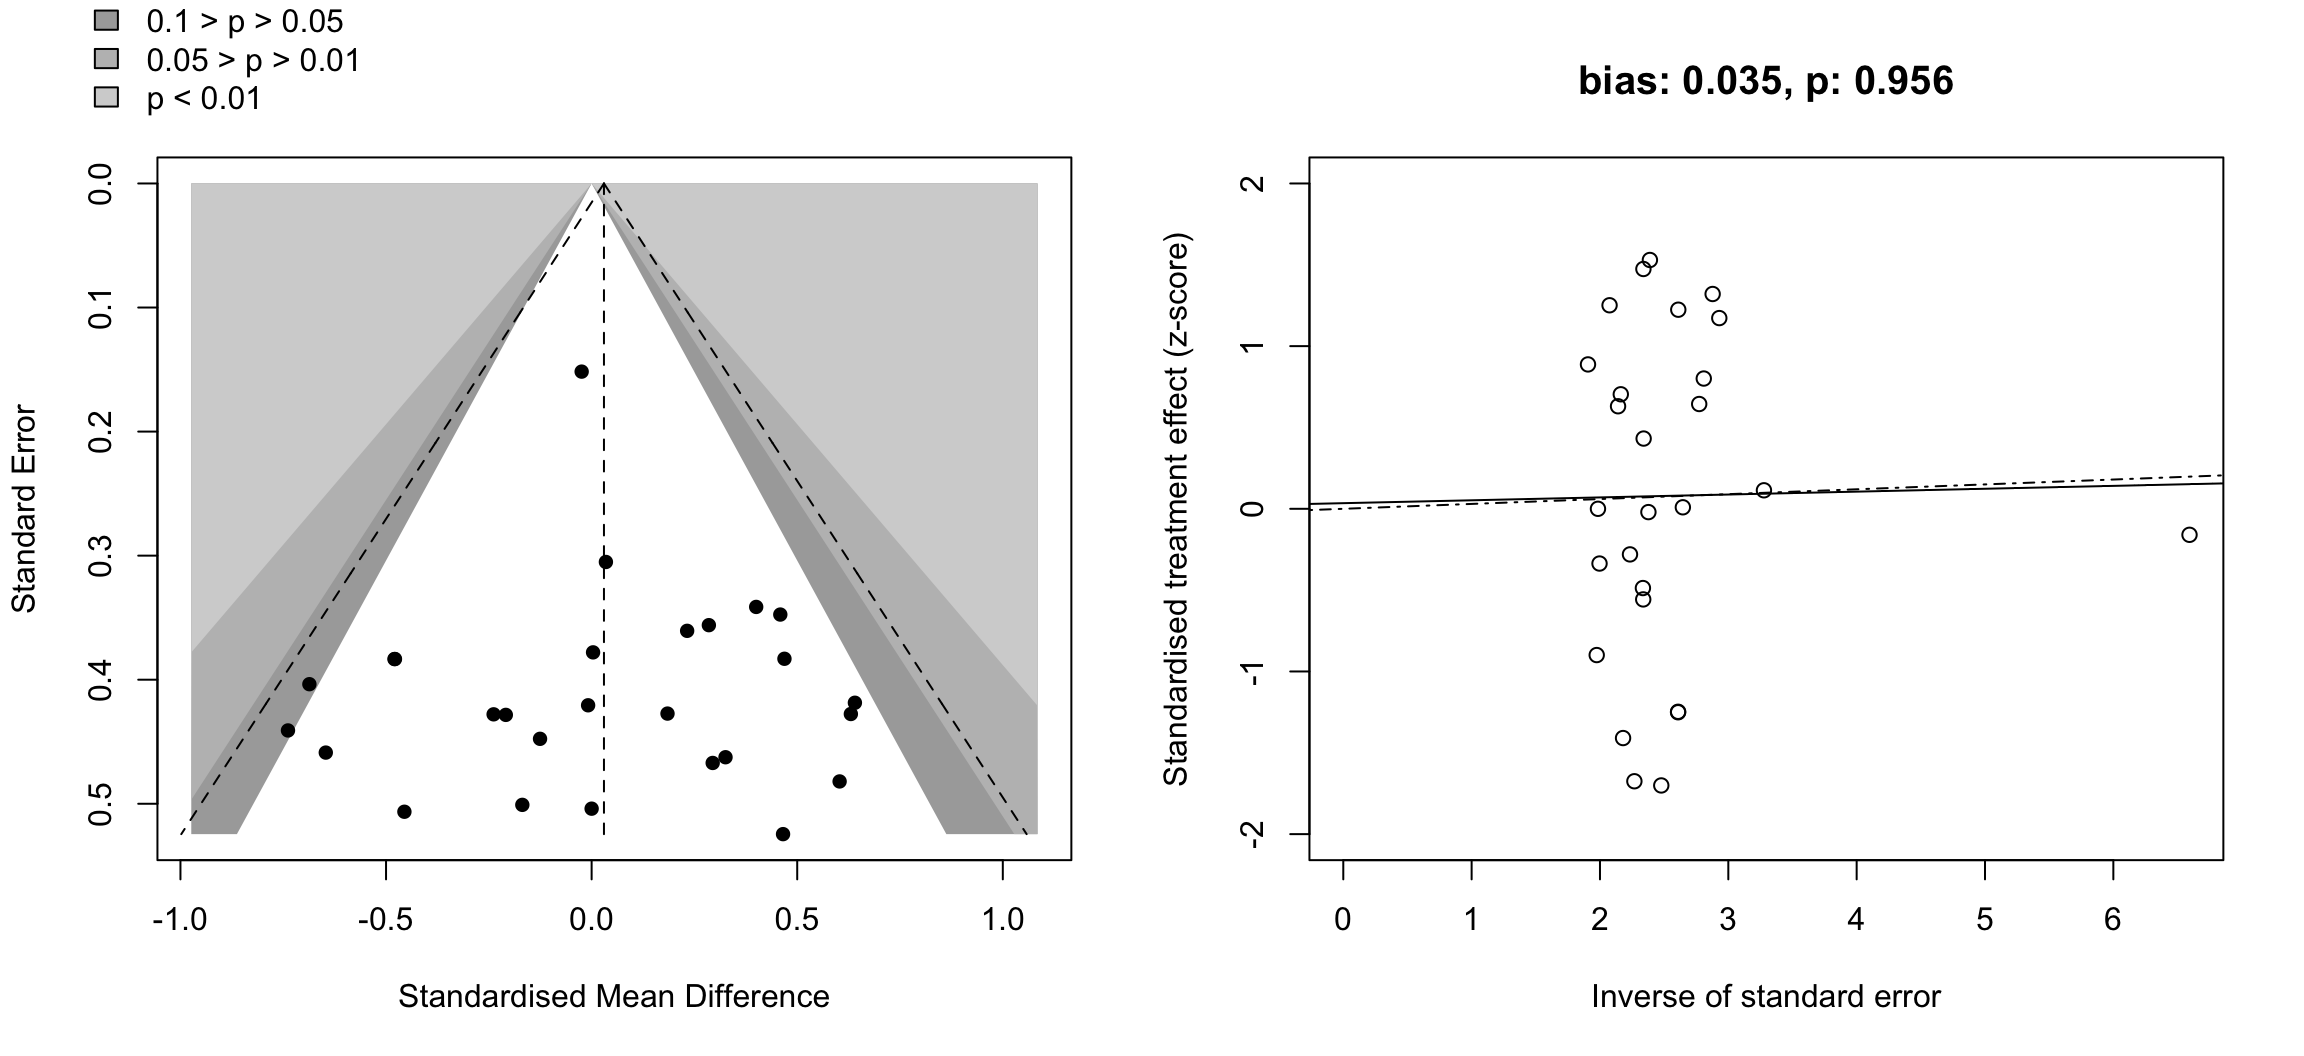 Left panel shows the contour-enhanced funnel plot for the meta-analysis. The shaded areas represent the p-value: light gray p < 0.01, gray 0.05 > p > 0.01, dark gray 0.1 > p > 0.05. The standard error of each study is plotted as a function of the effect size (Cohen’s d). Negative and positive x-axis values represent a favorable effect for MICT and HIIE, respectively. Right panel shows the radial plot, with the standardized treatment effect (z-score) plotted as a function of the inverse of the standard error. The dashed line represents the regression line, and the continuous line represents the regression line from the Egger Test.